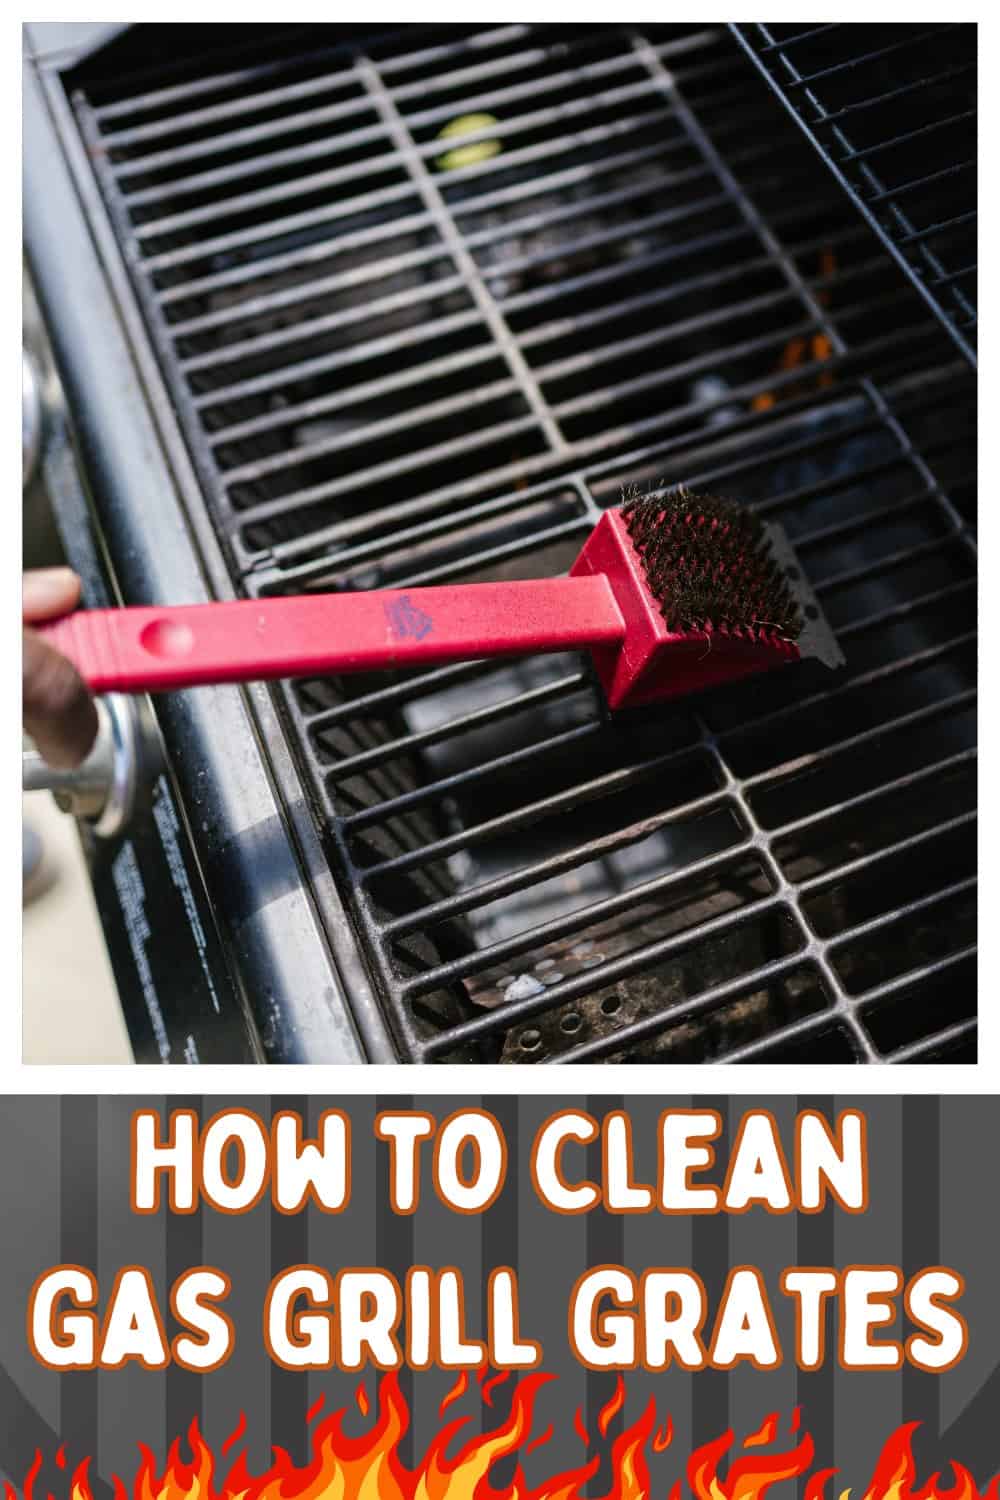 Tips for cleaning the grill grates on your barbeque